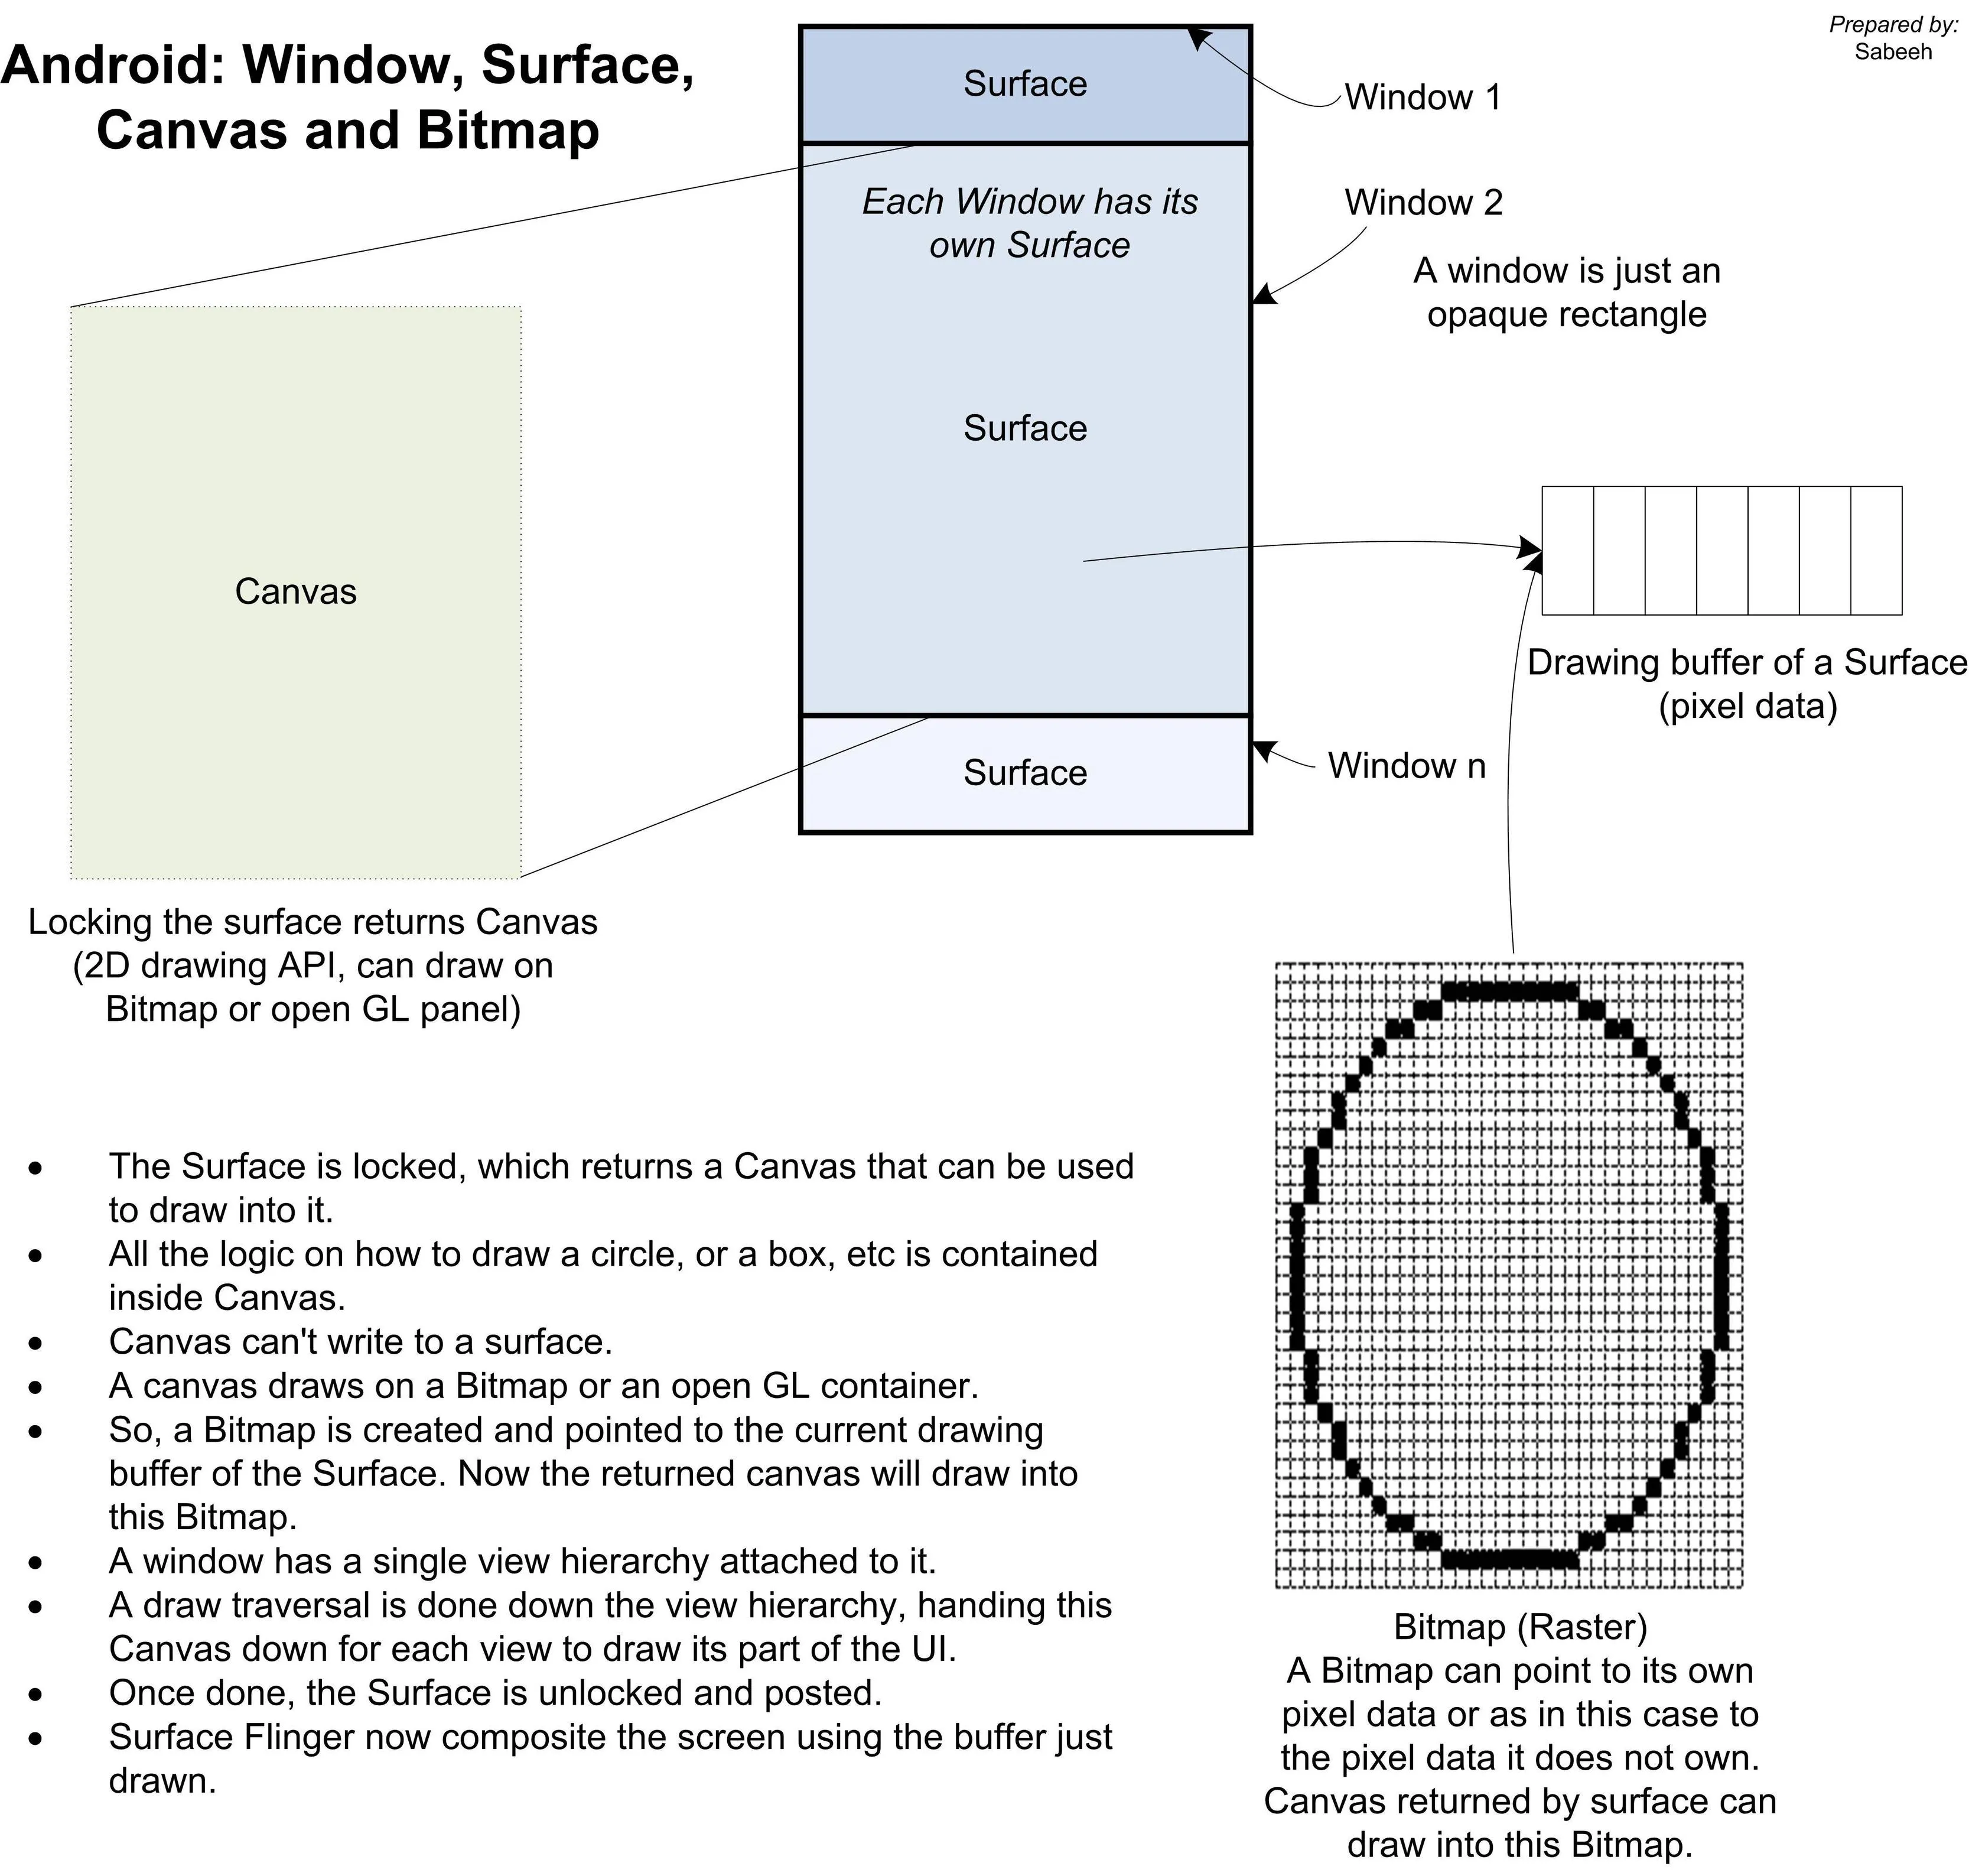 Android: Window, Surface, Canvas, and Bitmap concept